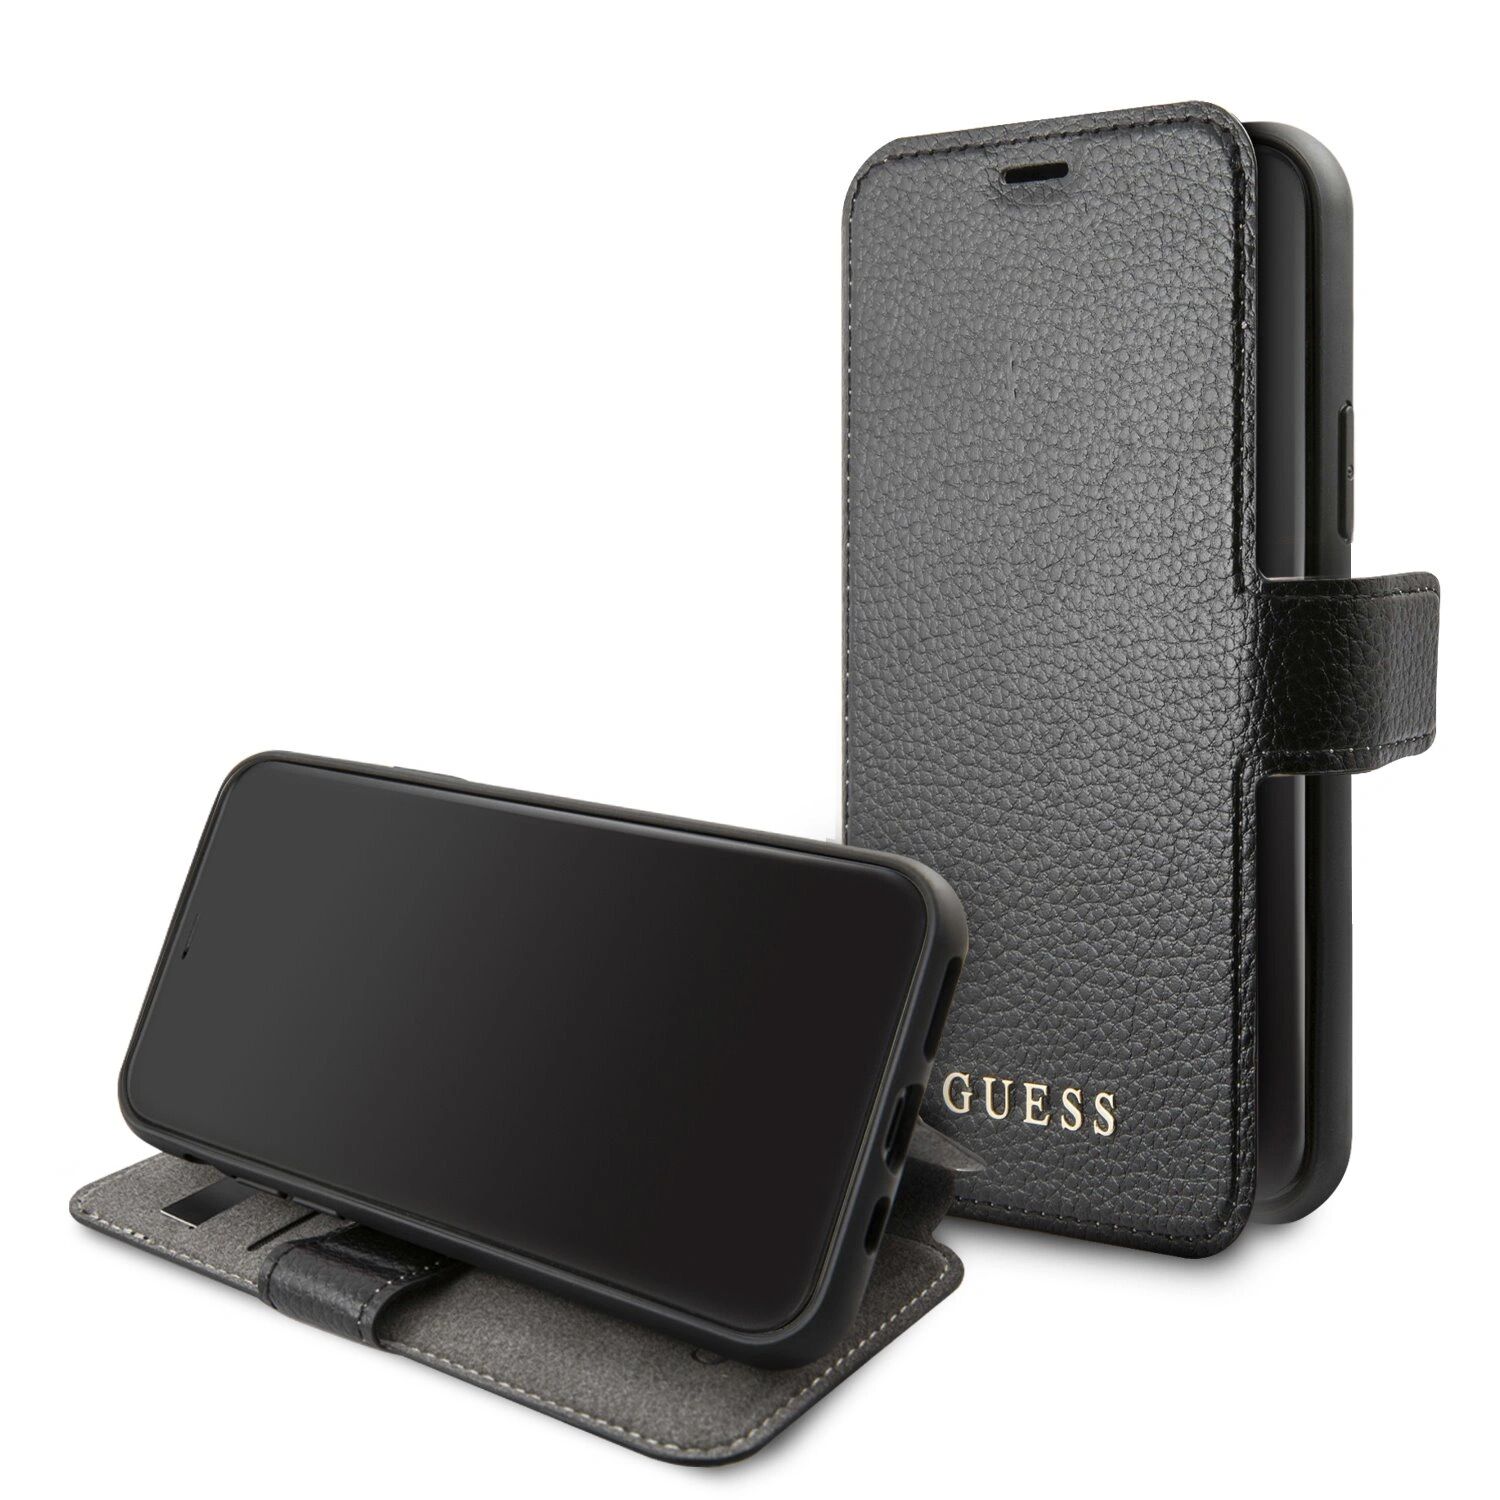 Guess Pouzdro / kryt pro iPhone 12 / 12 Pro - Guess, Iridescent Book Black